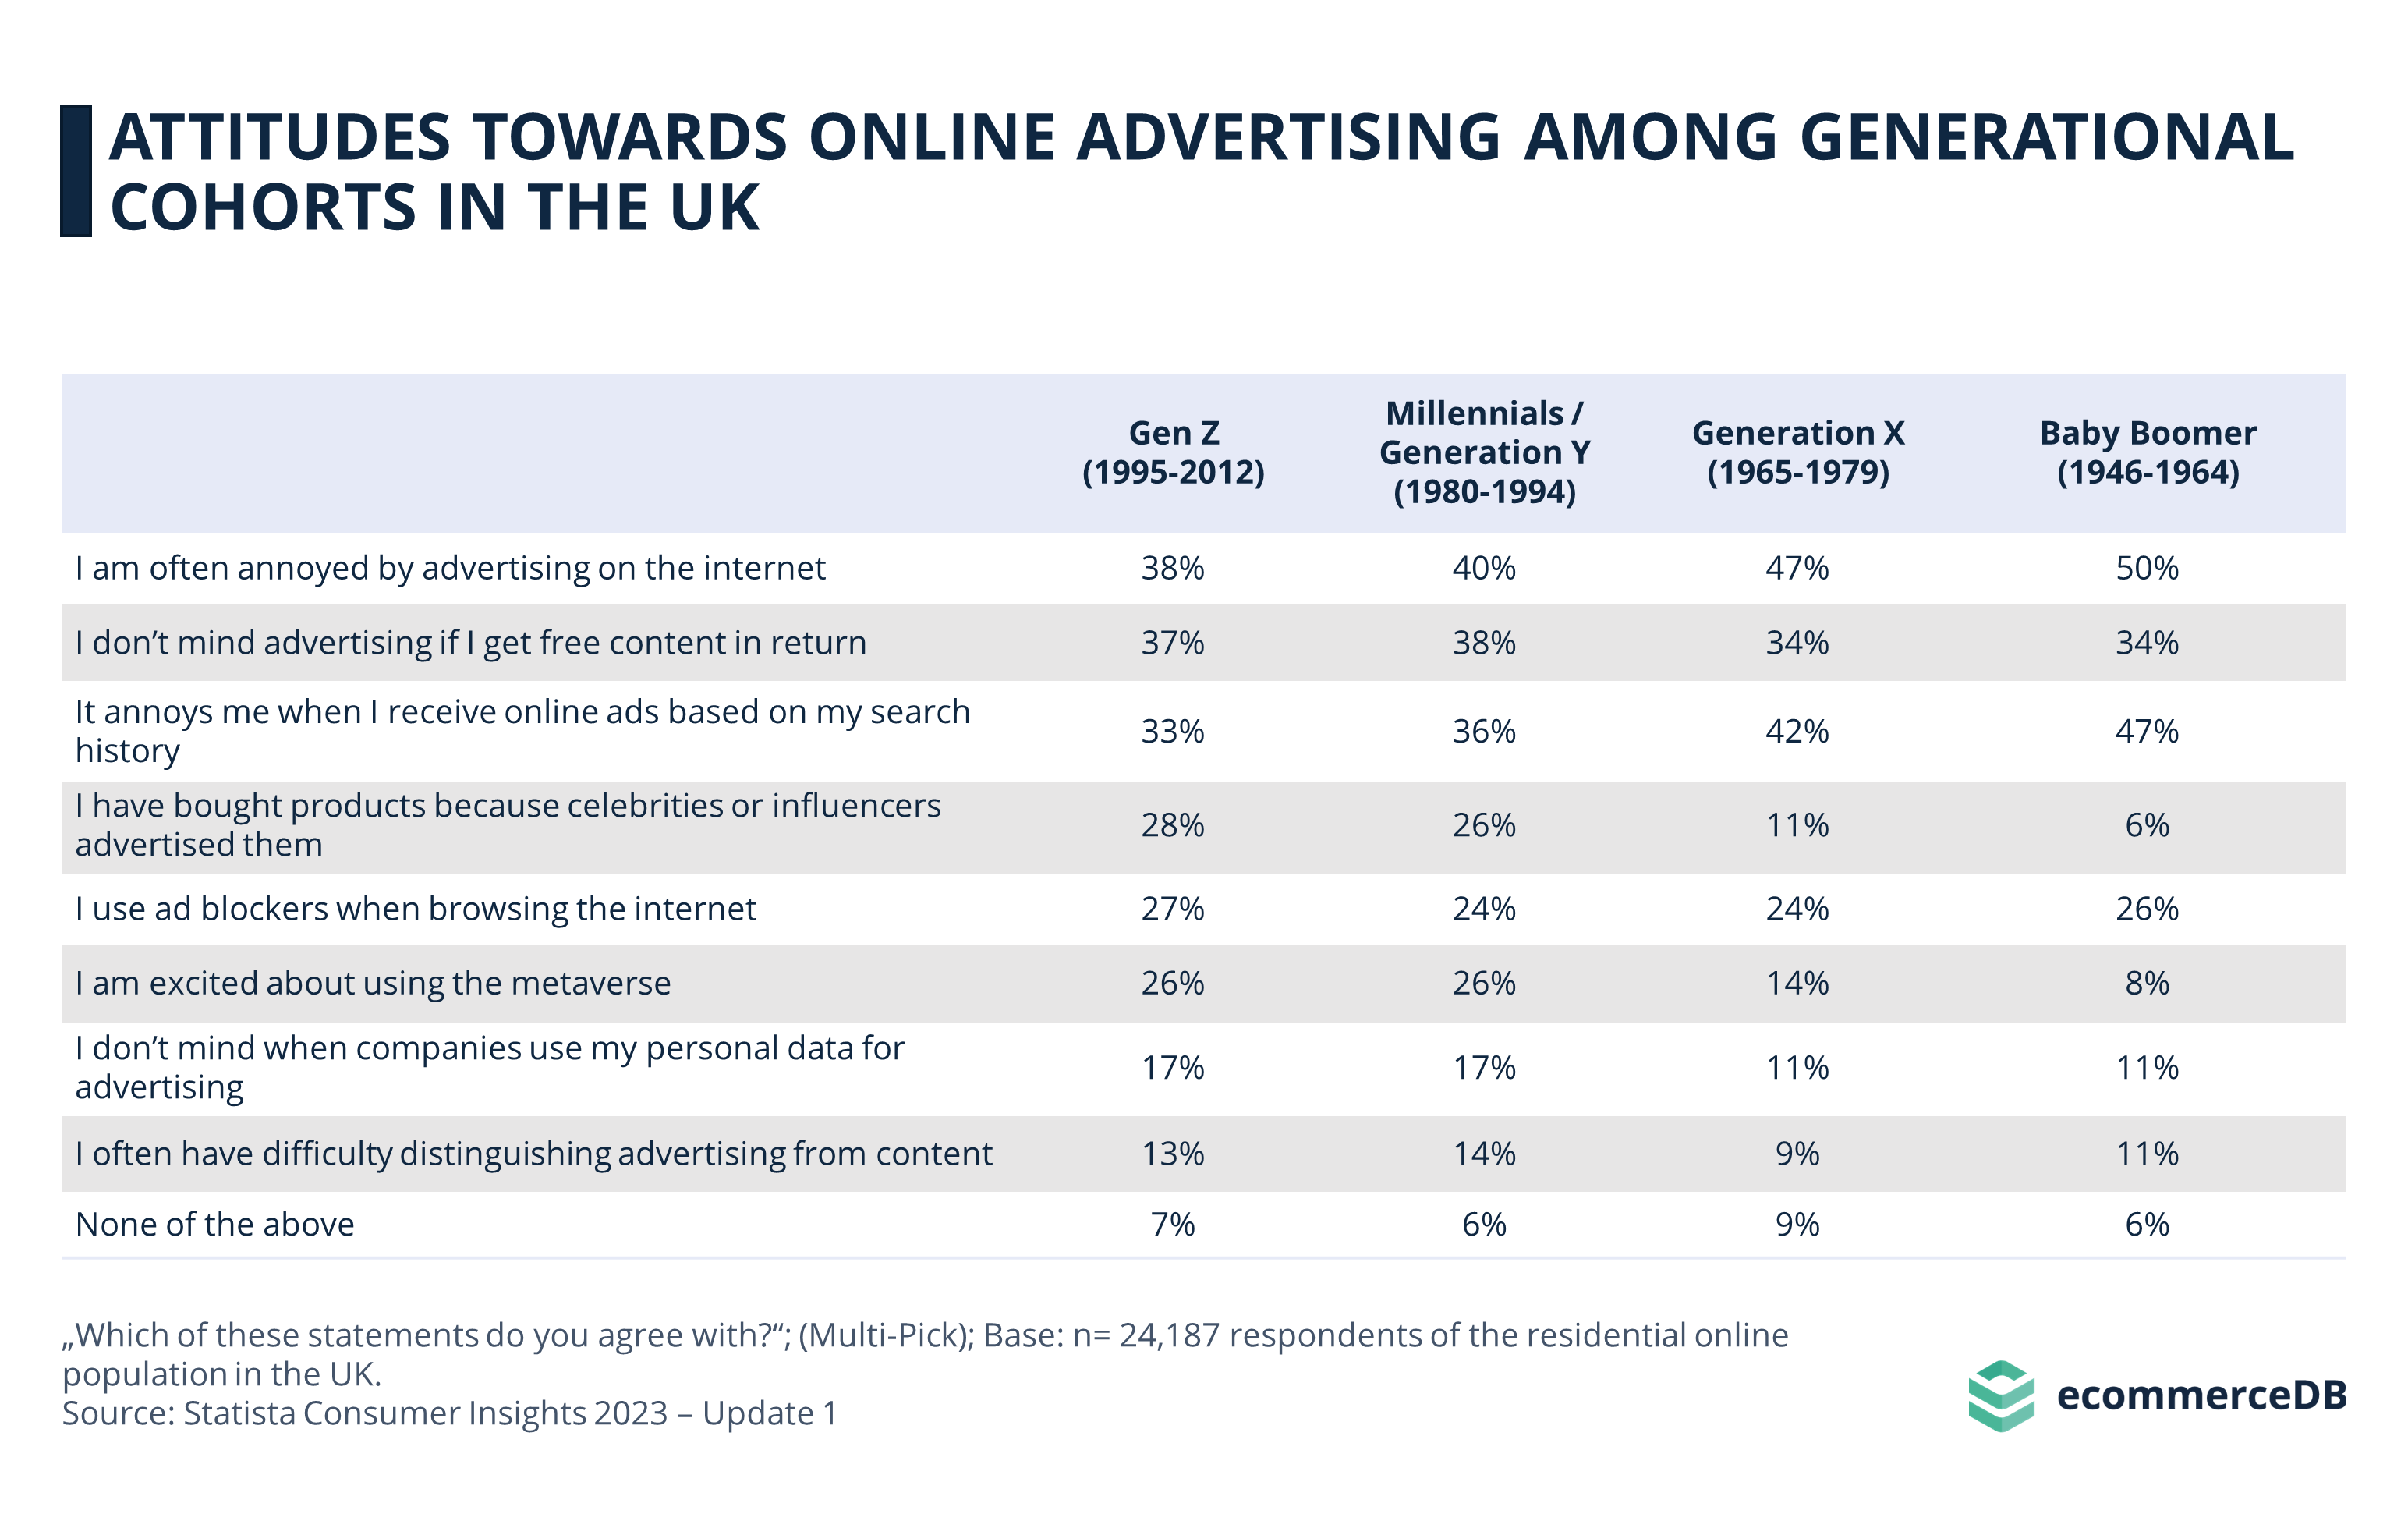 Attitudes Toward Online Advertising in the UK Among Generations